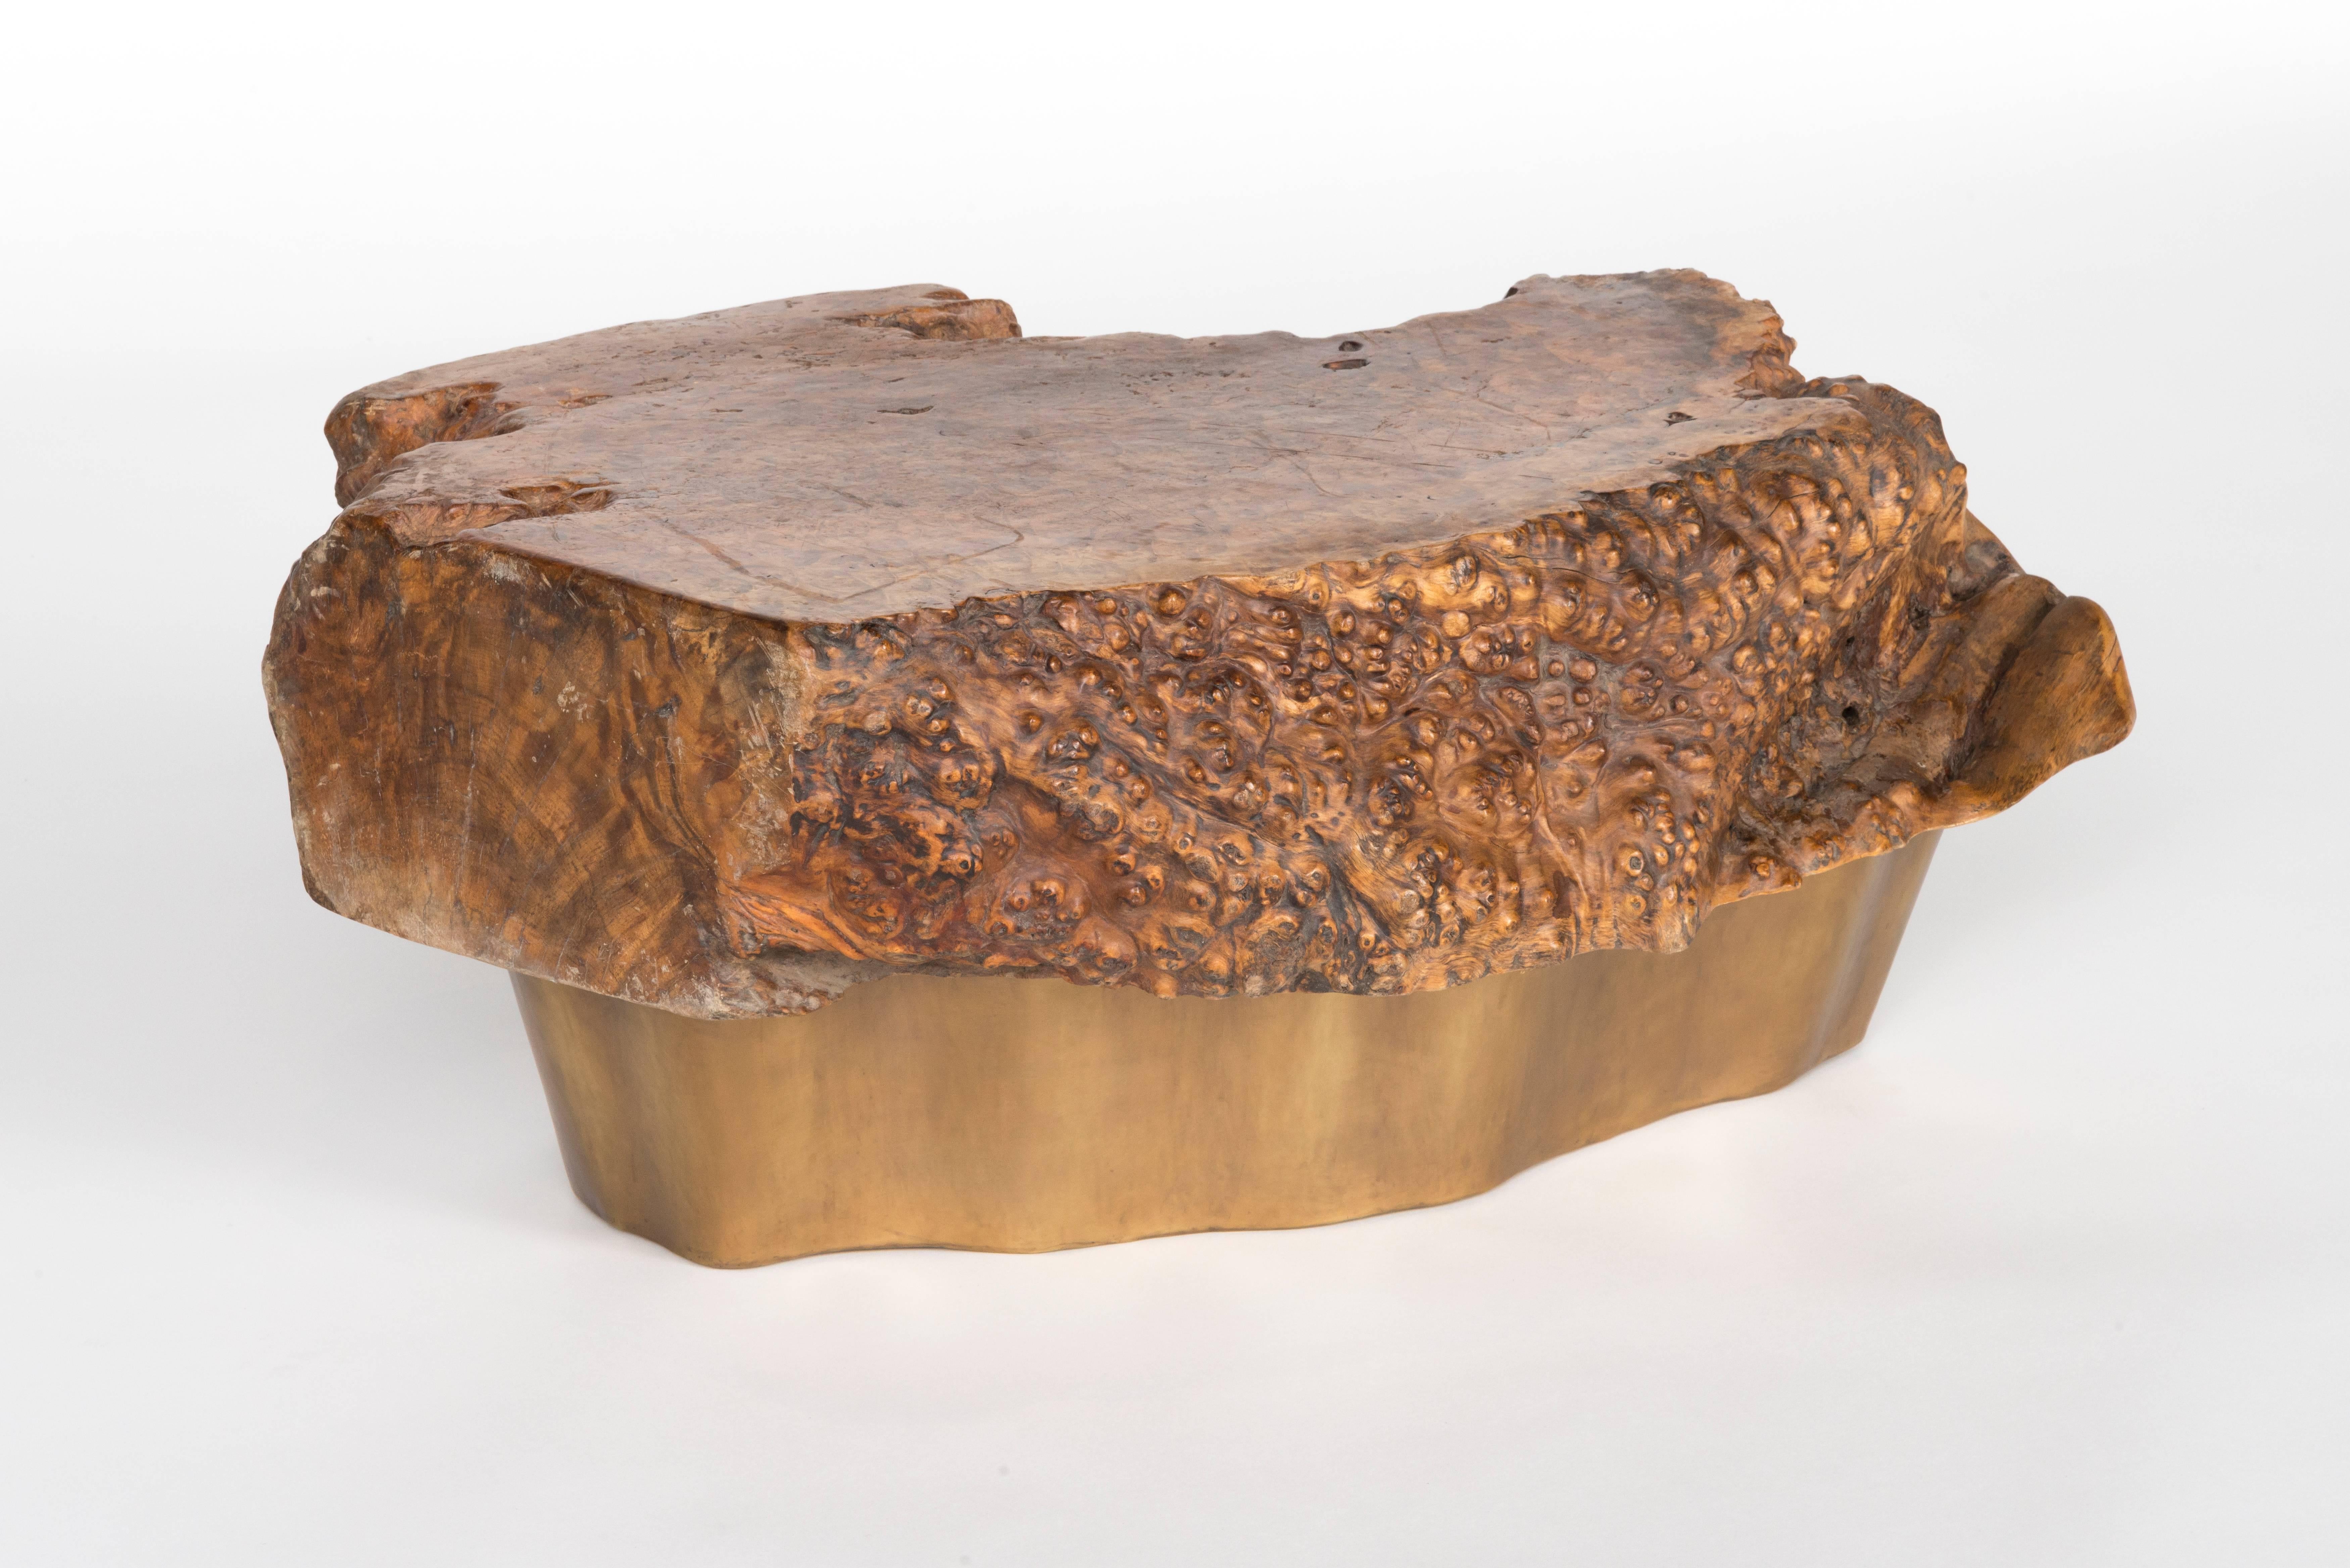 A one of a kind table consisting of an antique burl wood top from the 19th century circa late Ching dynasty and a contemporary Robert Kuo hand repoussé root shaped brass base.

